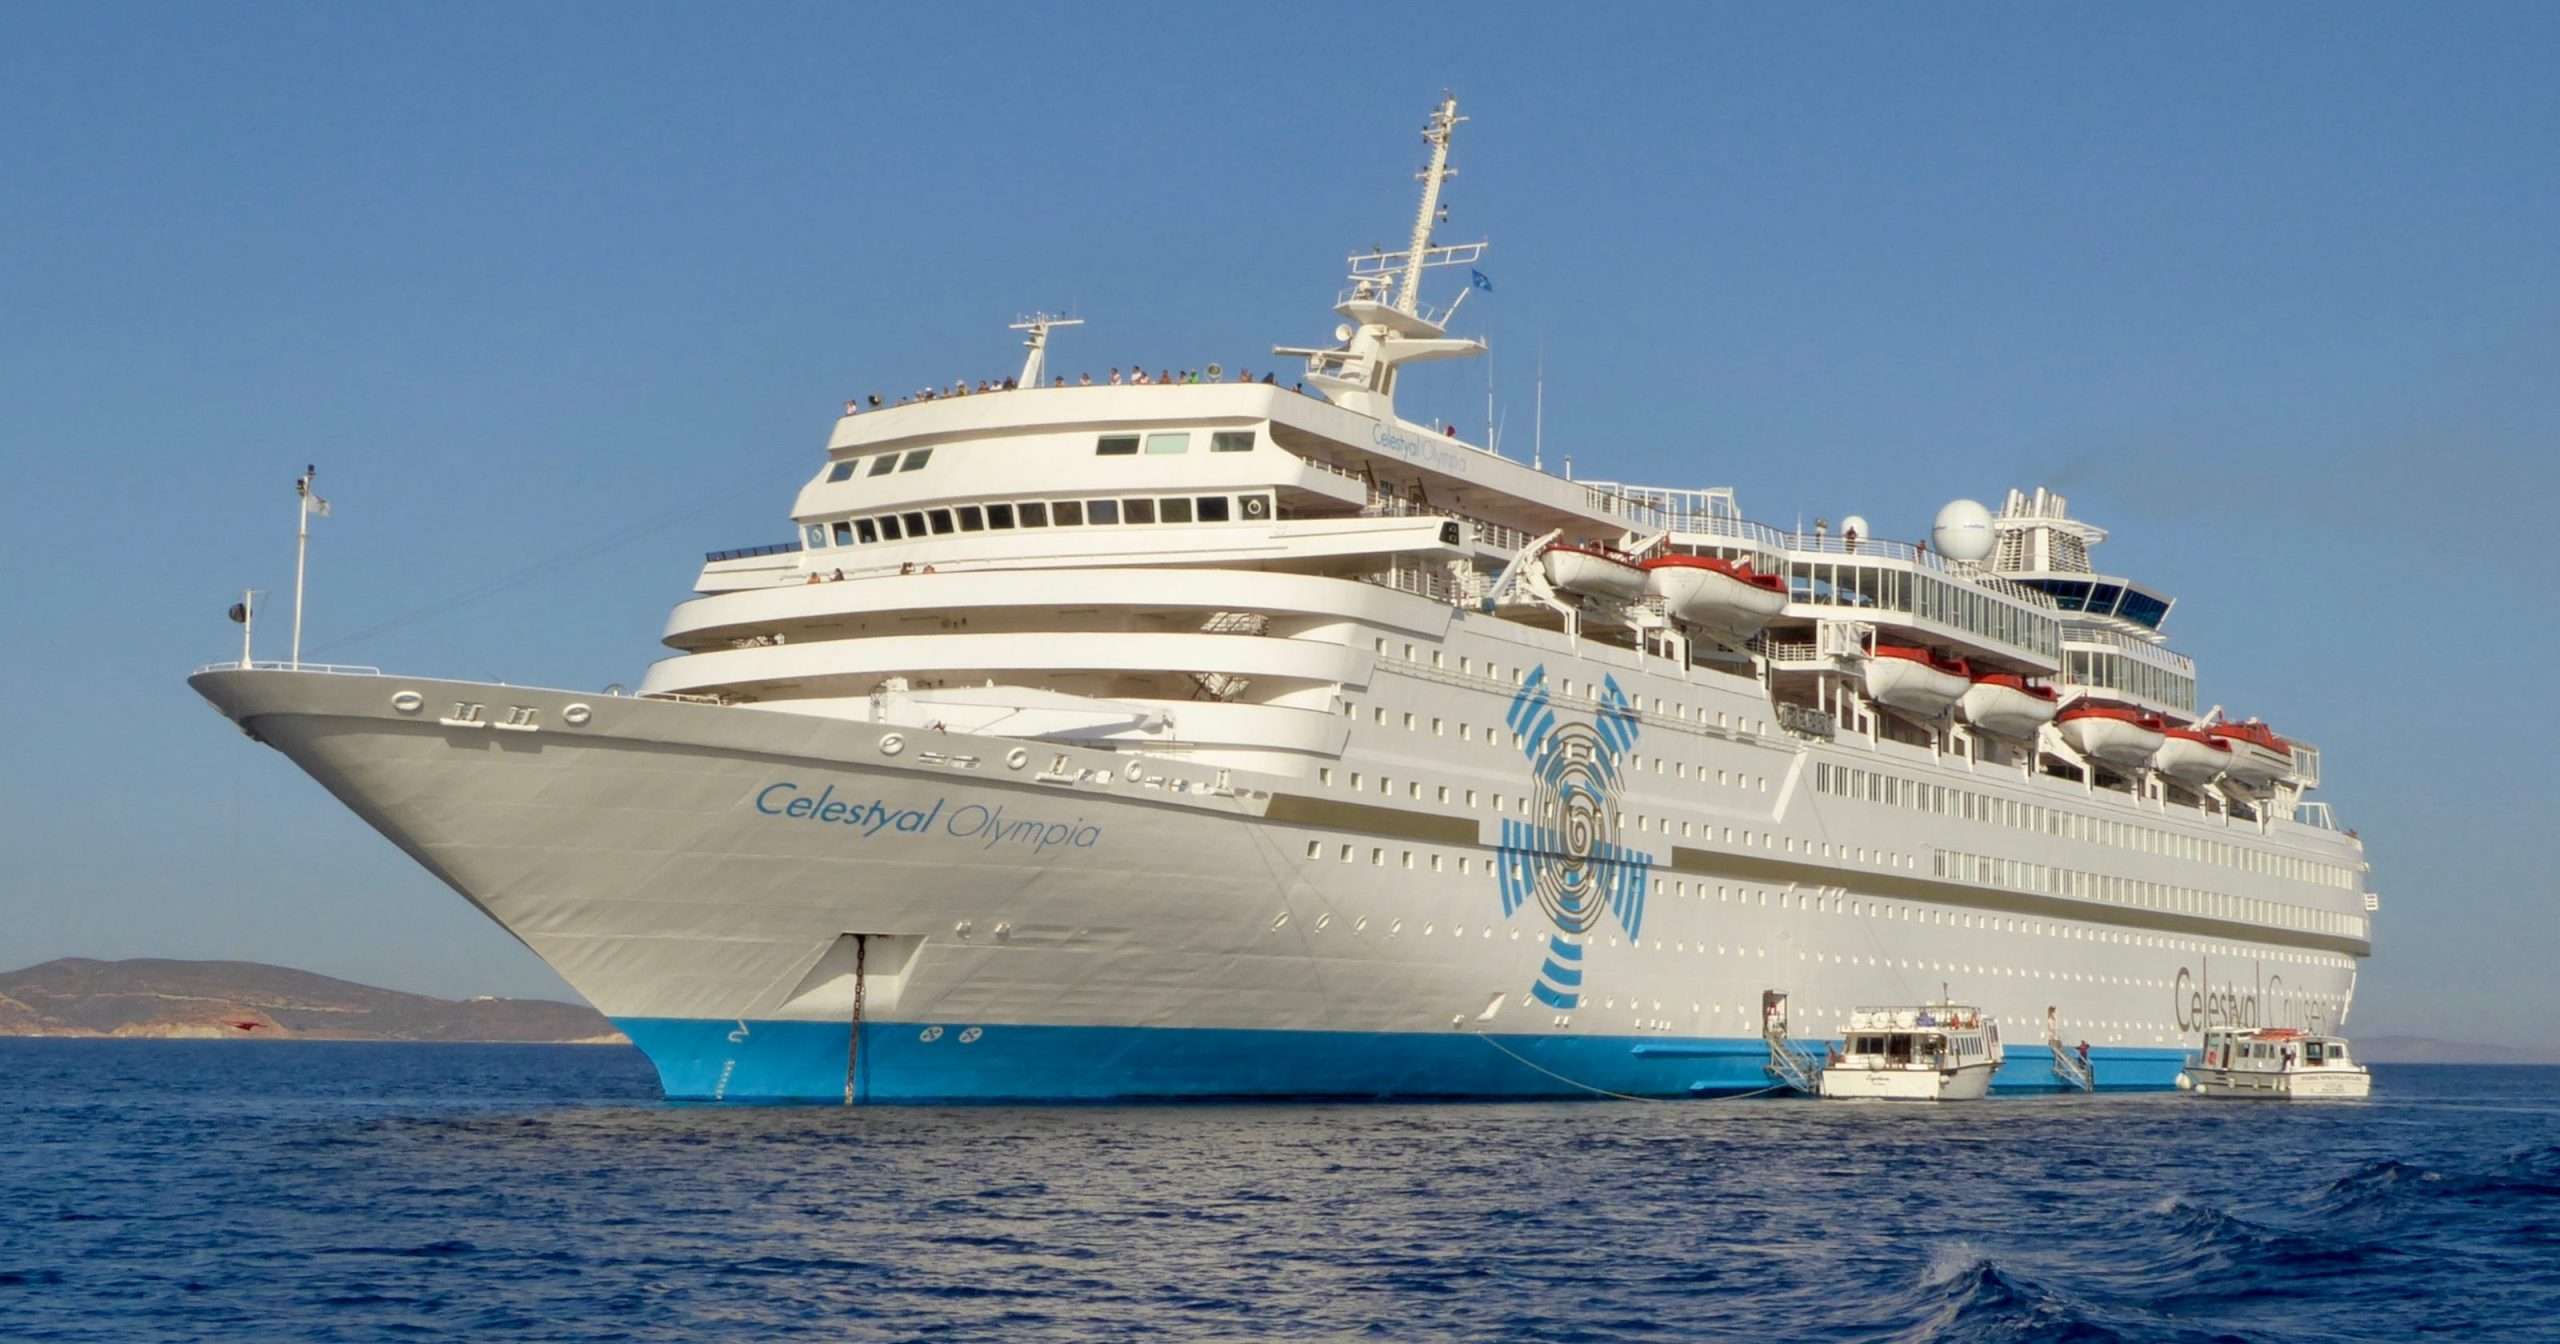 Celestyal Olympia: A cruise ship that will take you to Greek islands